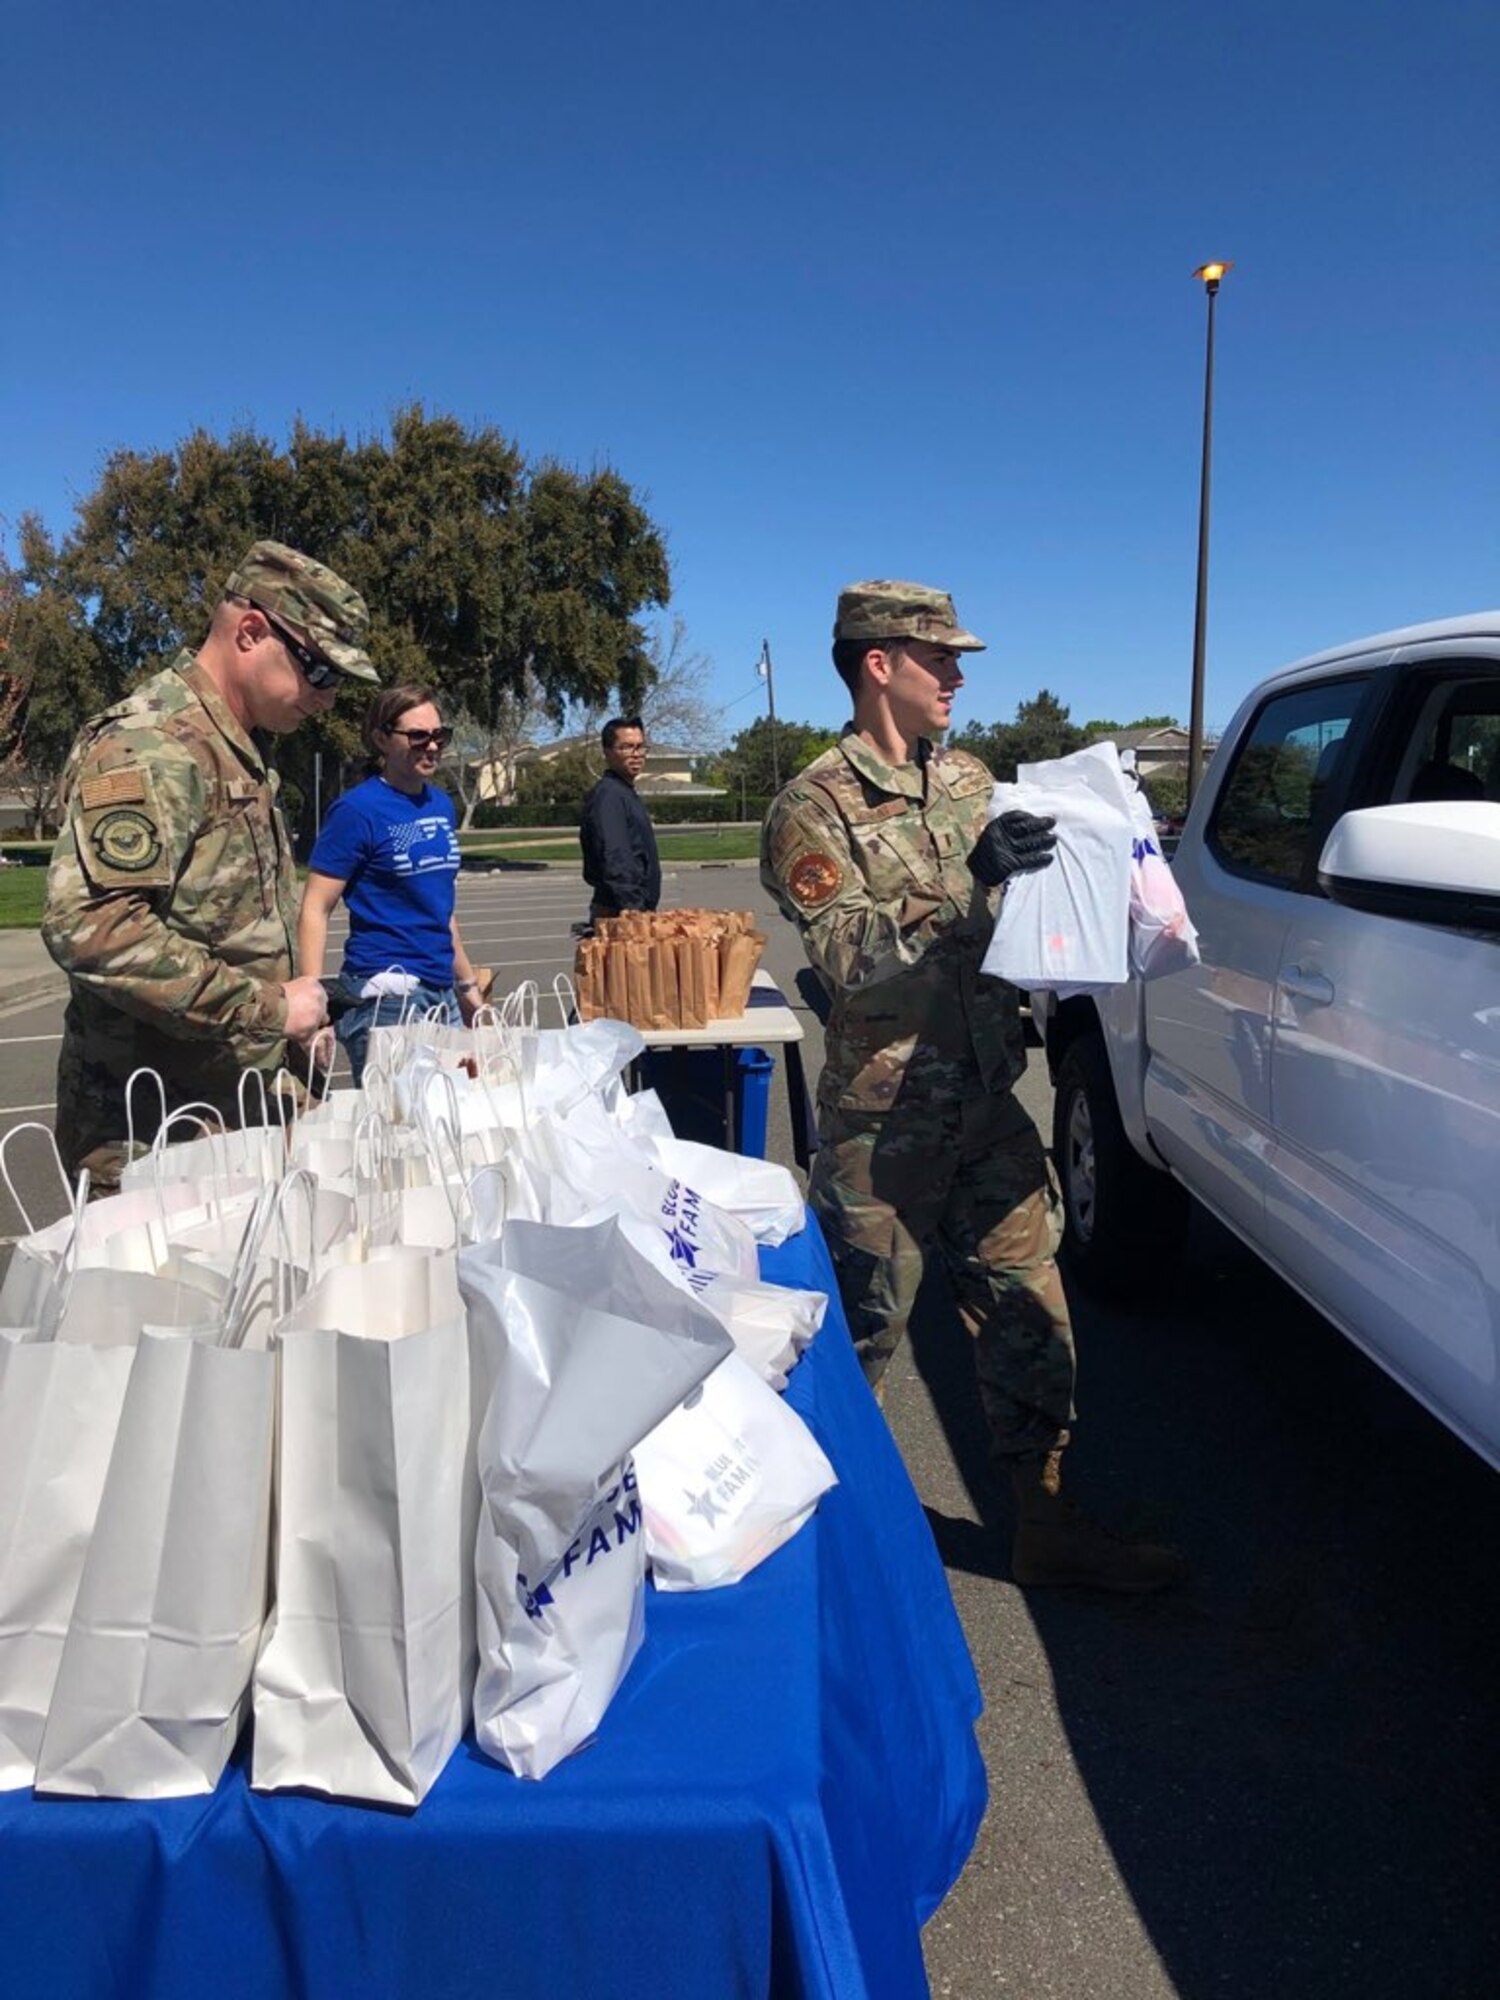 Airmen pass out relief kits to Airmen in cars.